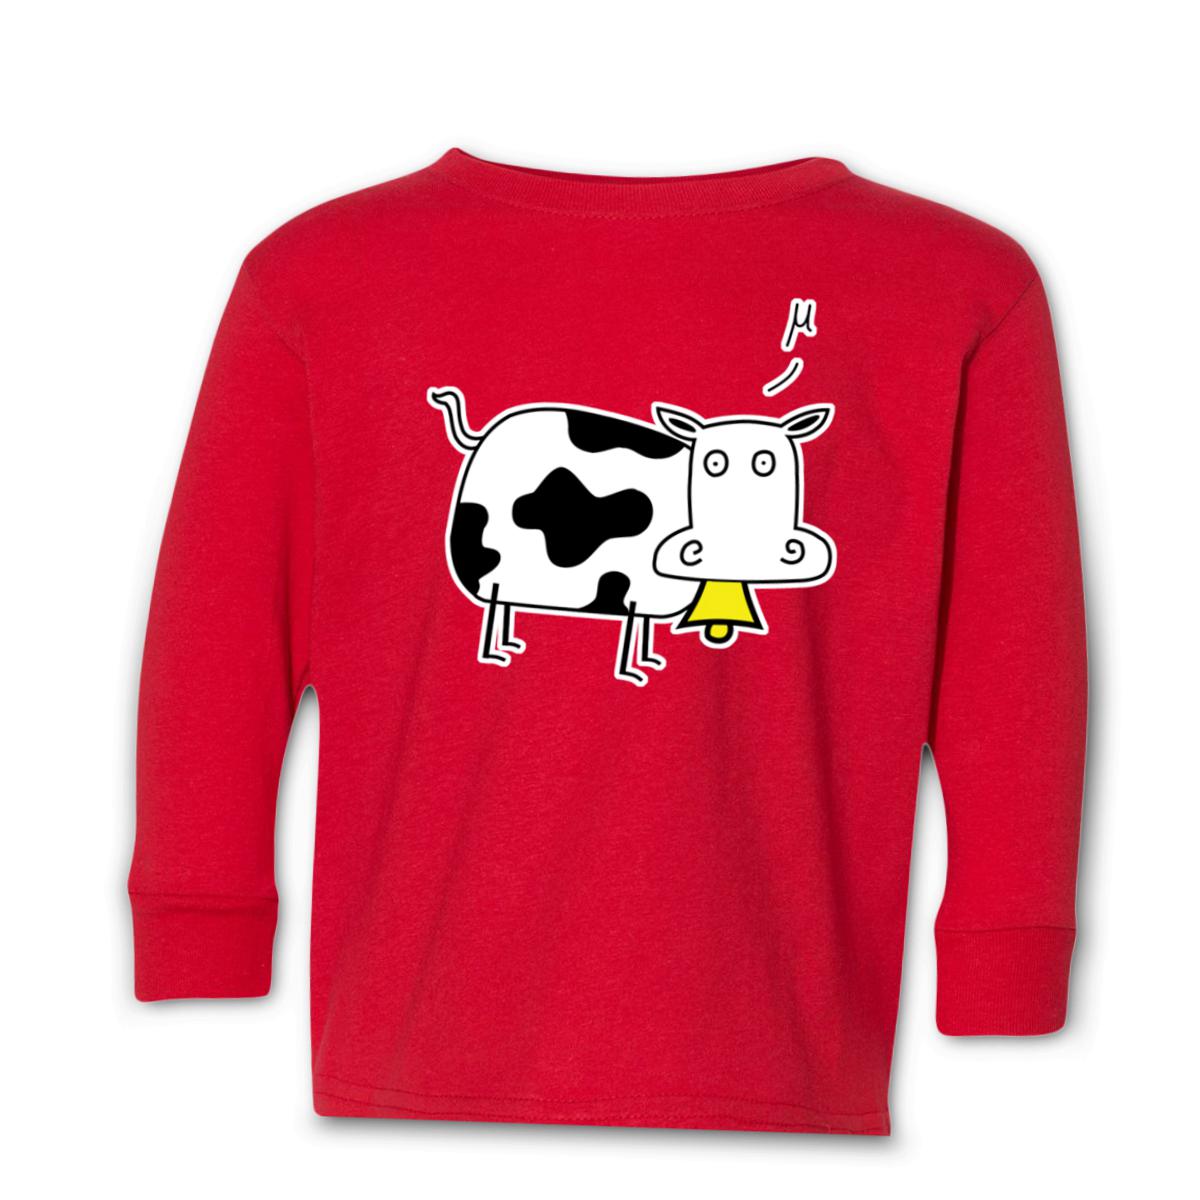 Mu Cow Toddler Long Sleeve Tee 2T red